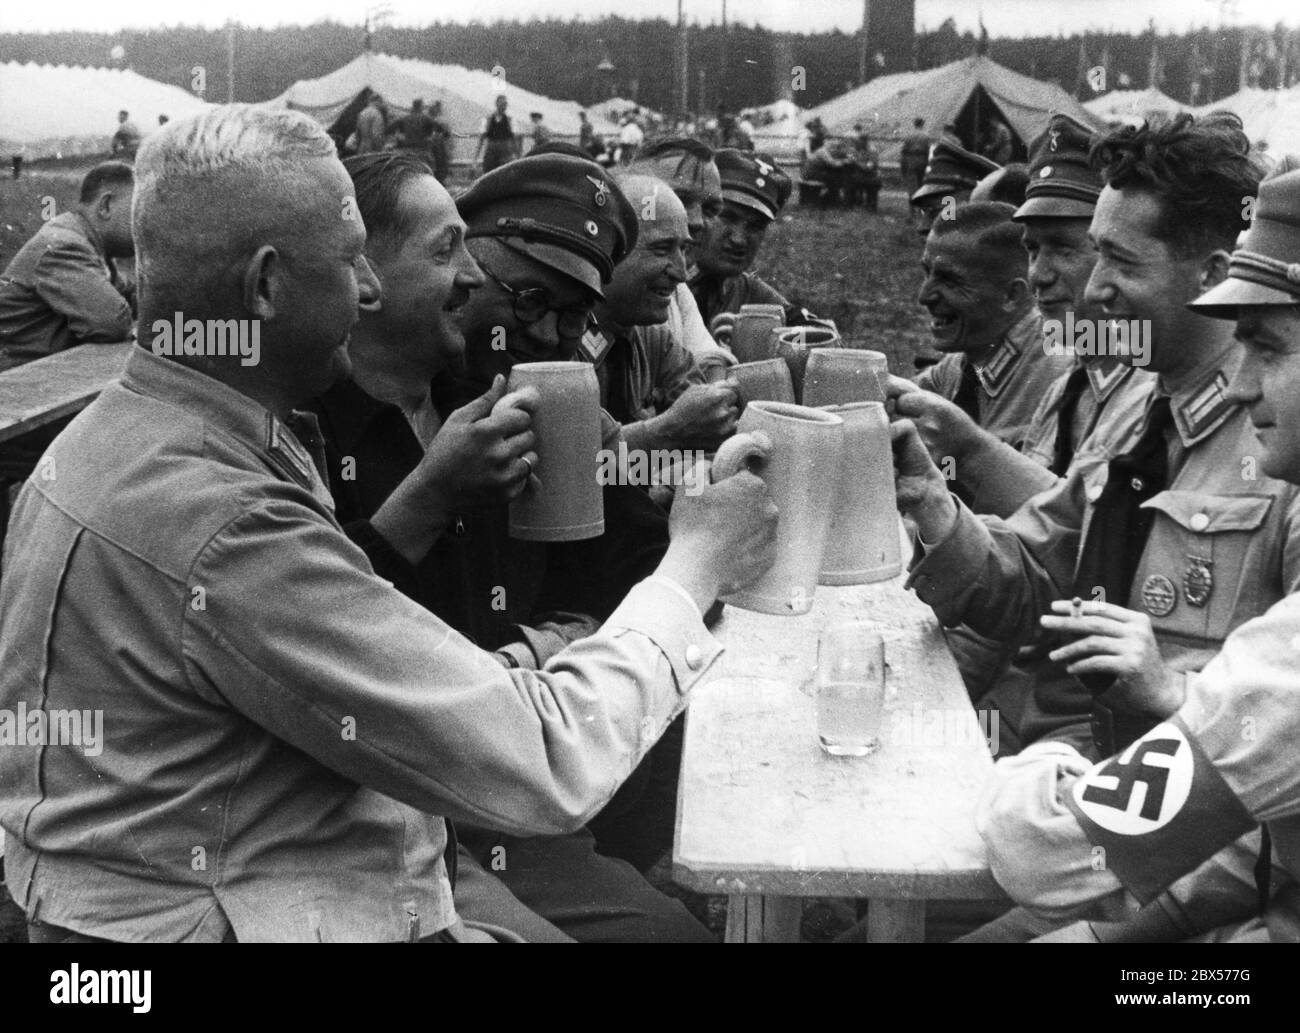 In the camp Harnisch Schlag of political leaders from Berlin, party officials are cheerfully toasting with beer mugs. Stock Photo